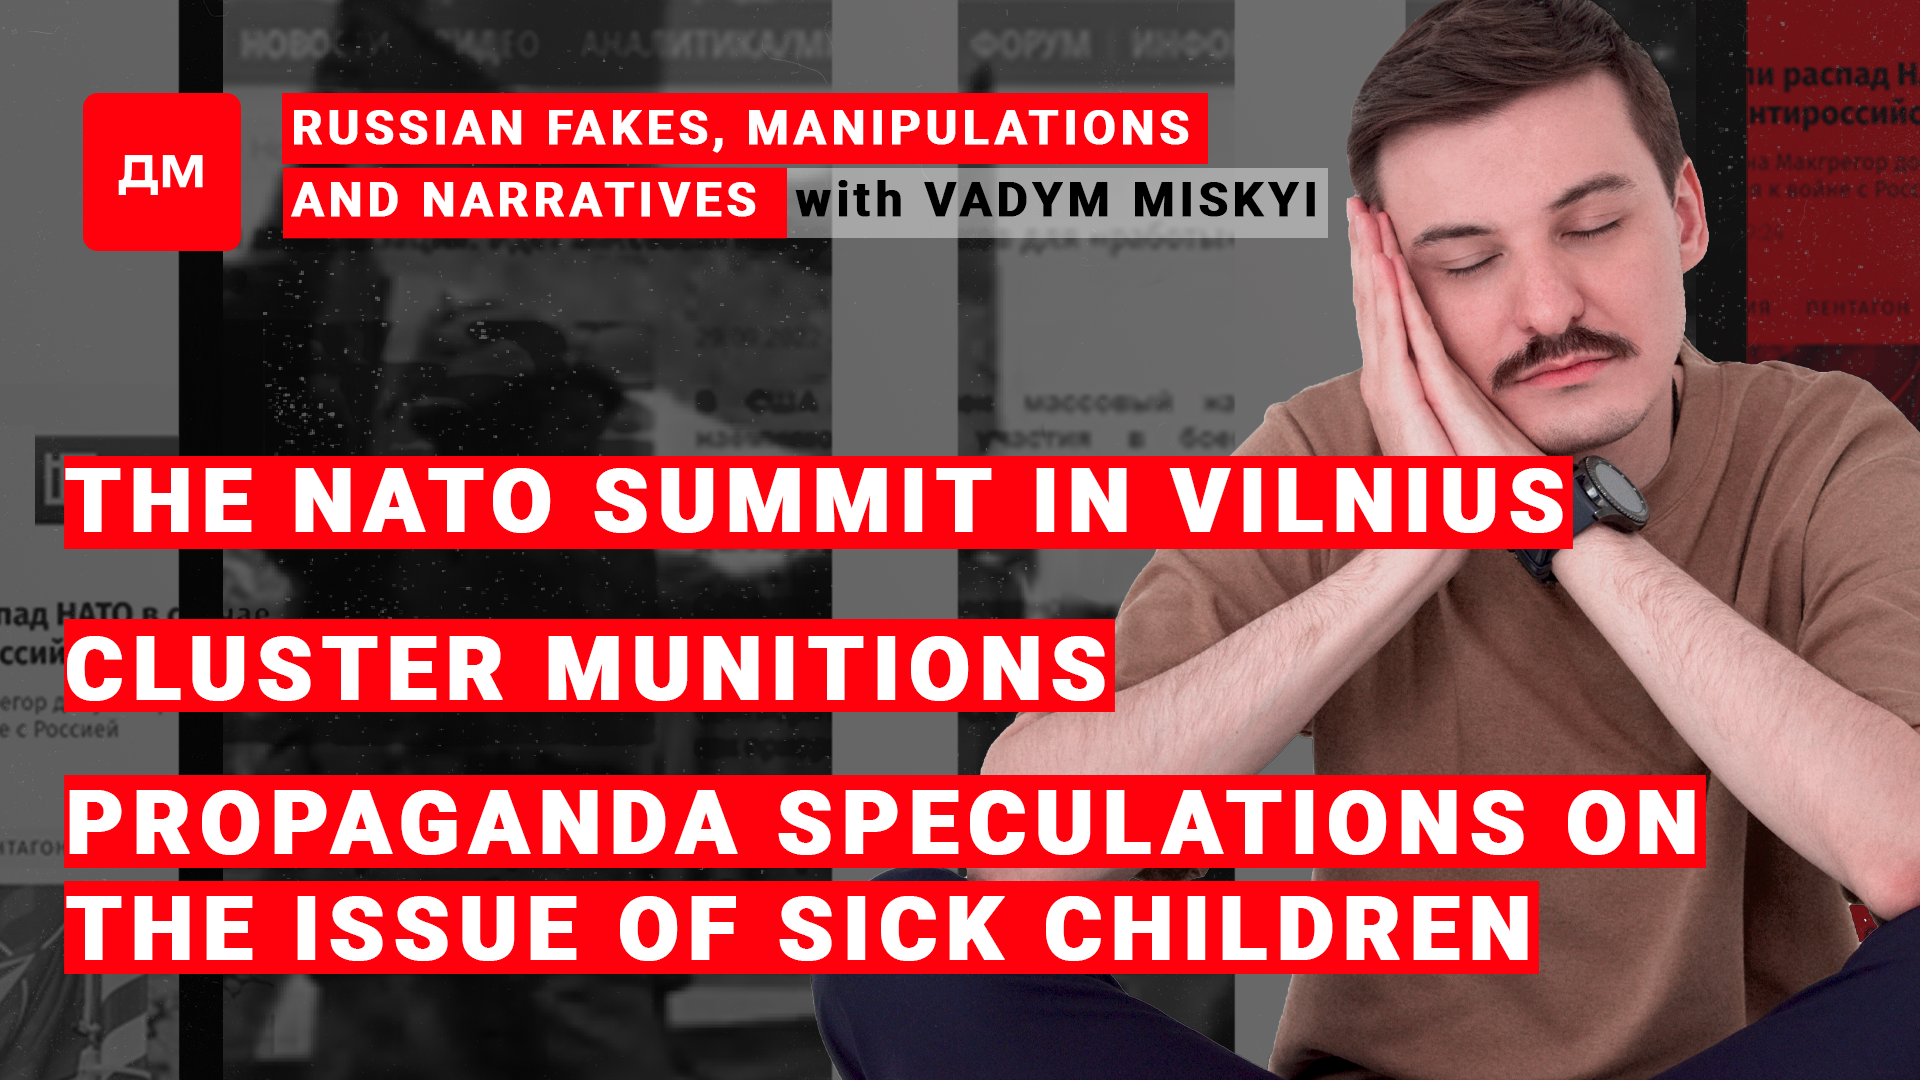 Image: Russian fakes, manipulations and narratives / Briefing by Vadym Miskyi #13/Season II